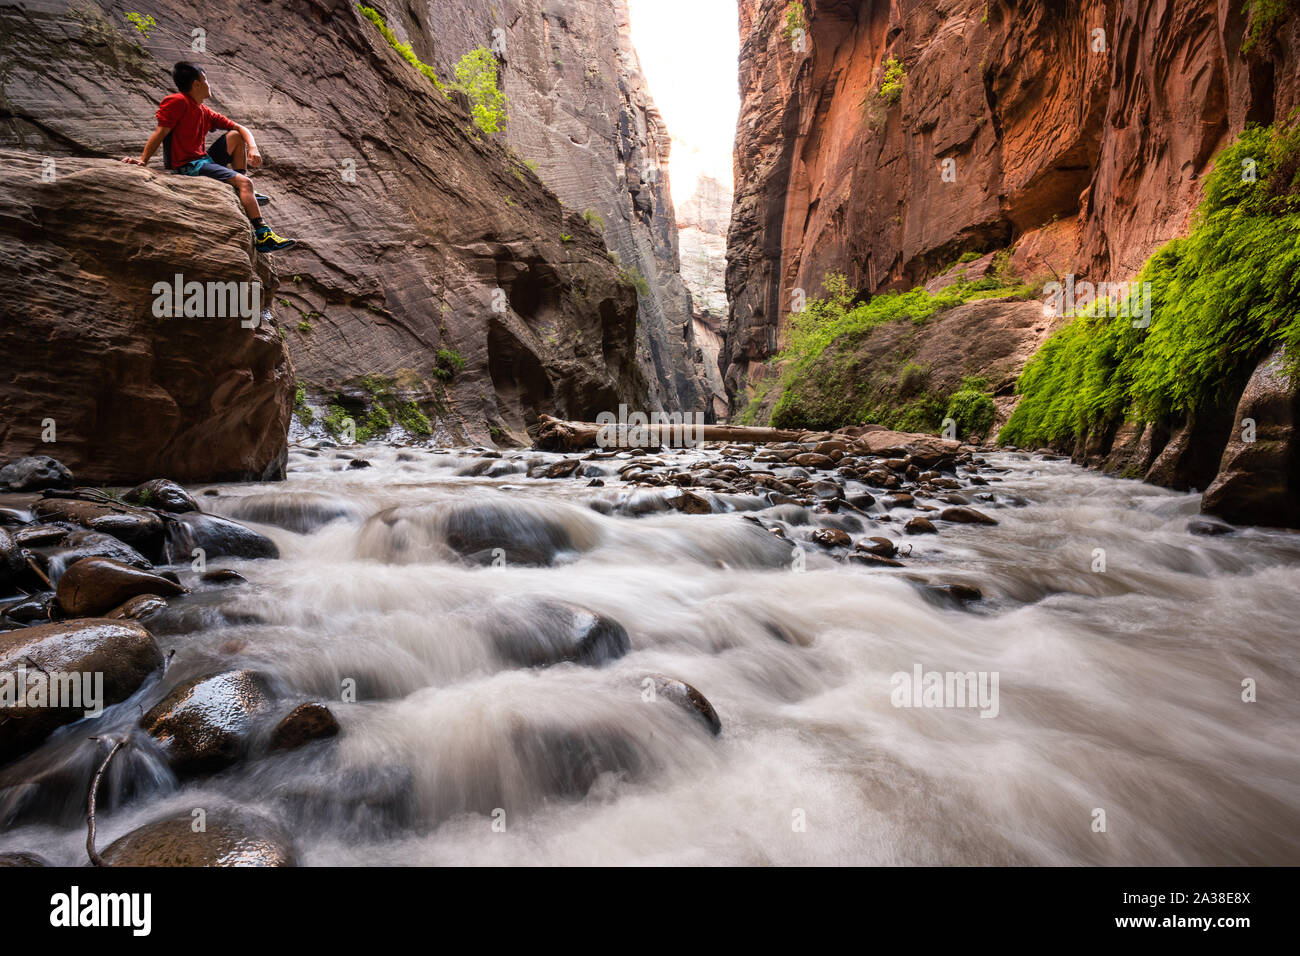 Hiker sitting on a Boulder in Slot Canyon, The Narrows, Zion National Park, Utah, United States Stock Photo